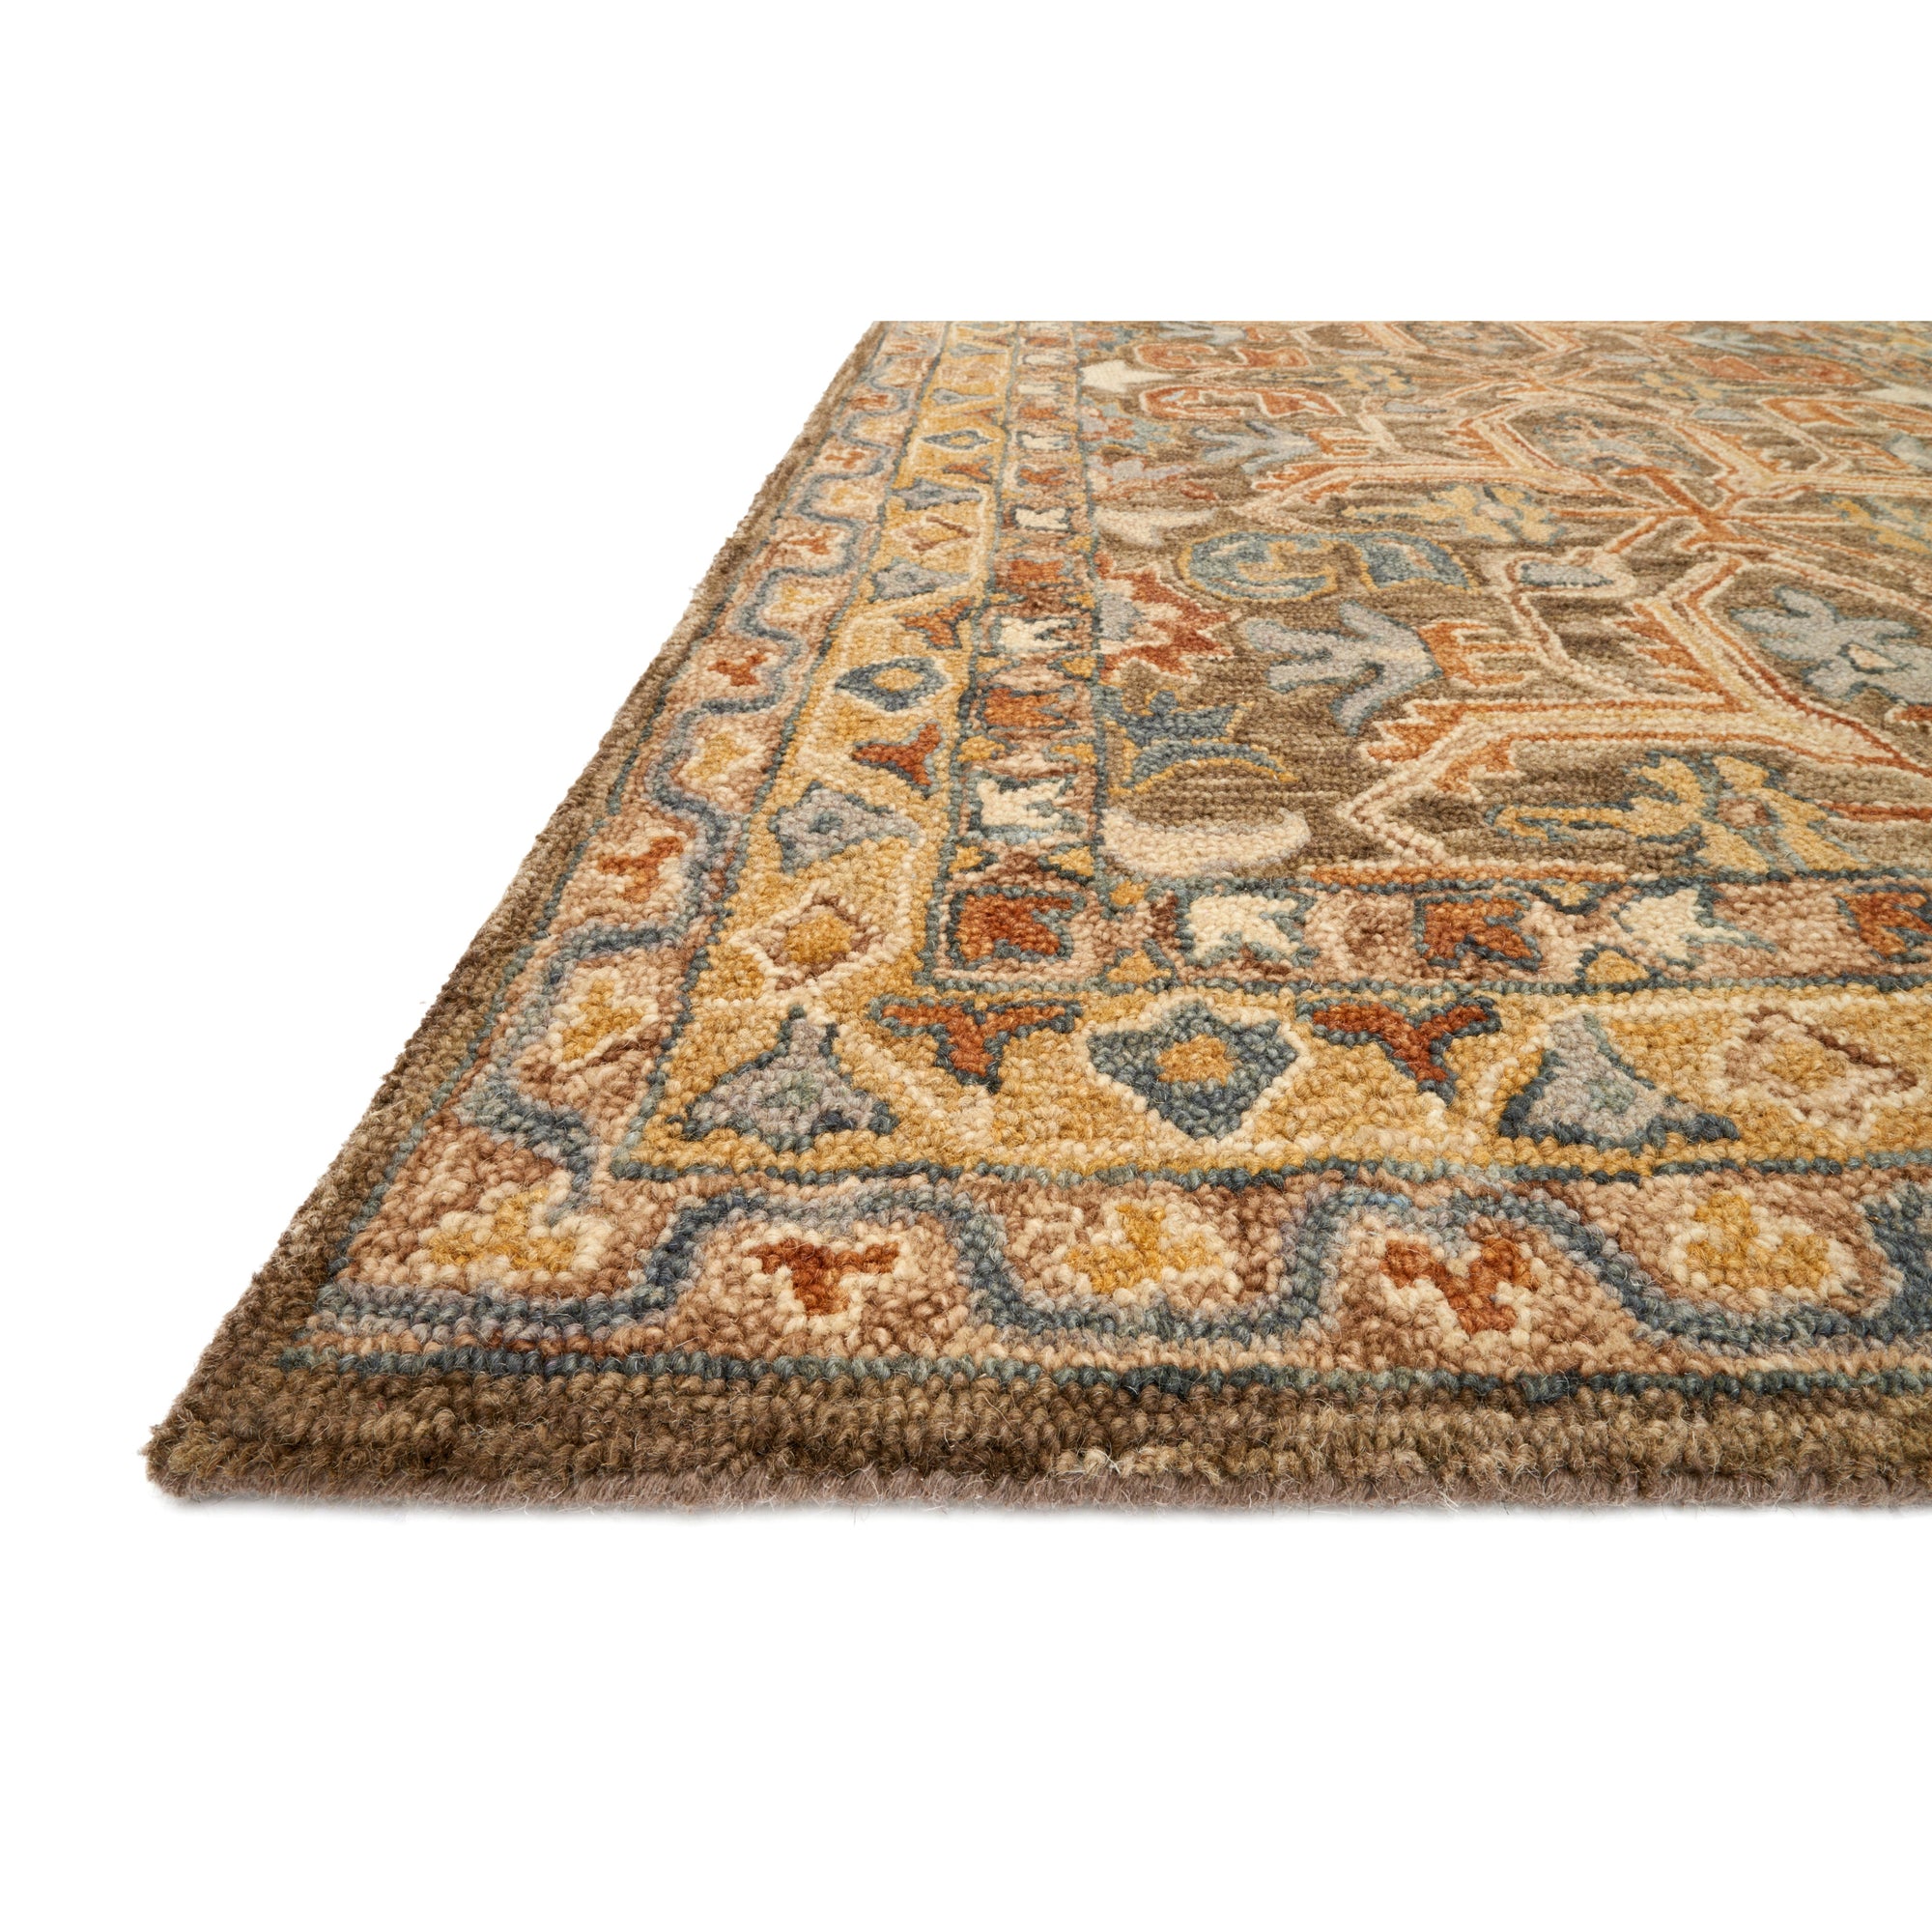 Rugs by Roo Loloi Victoria Walnut Multi Area Rug in size 18" x 18" Sample